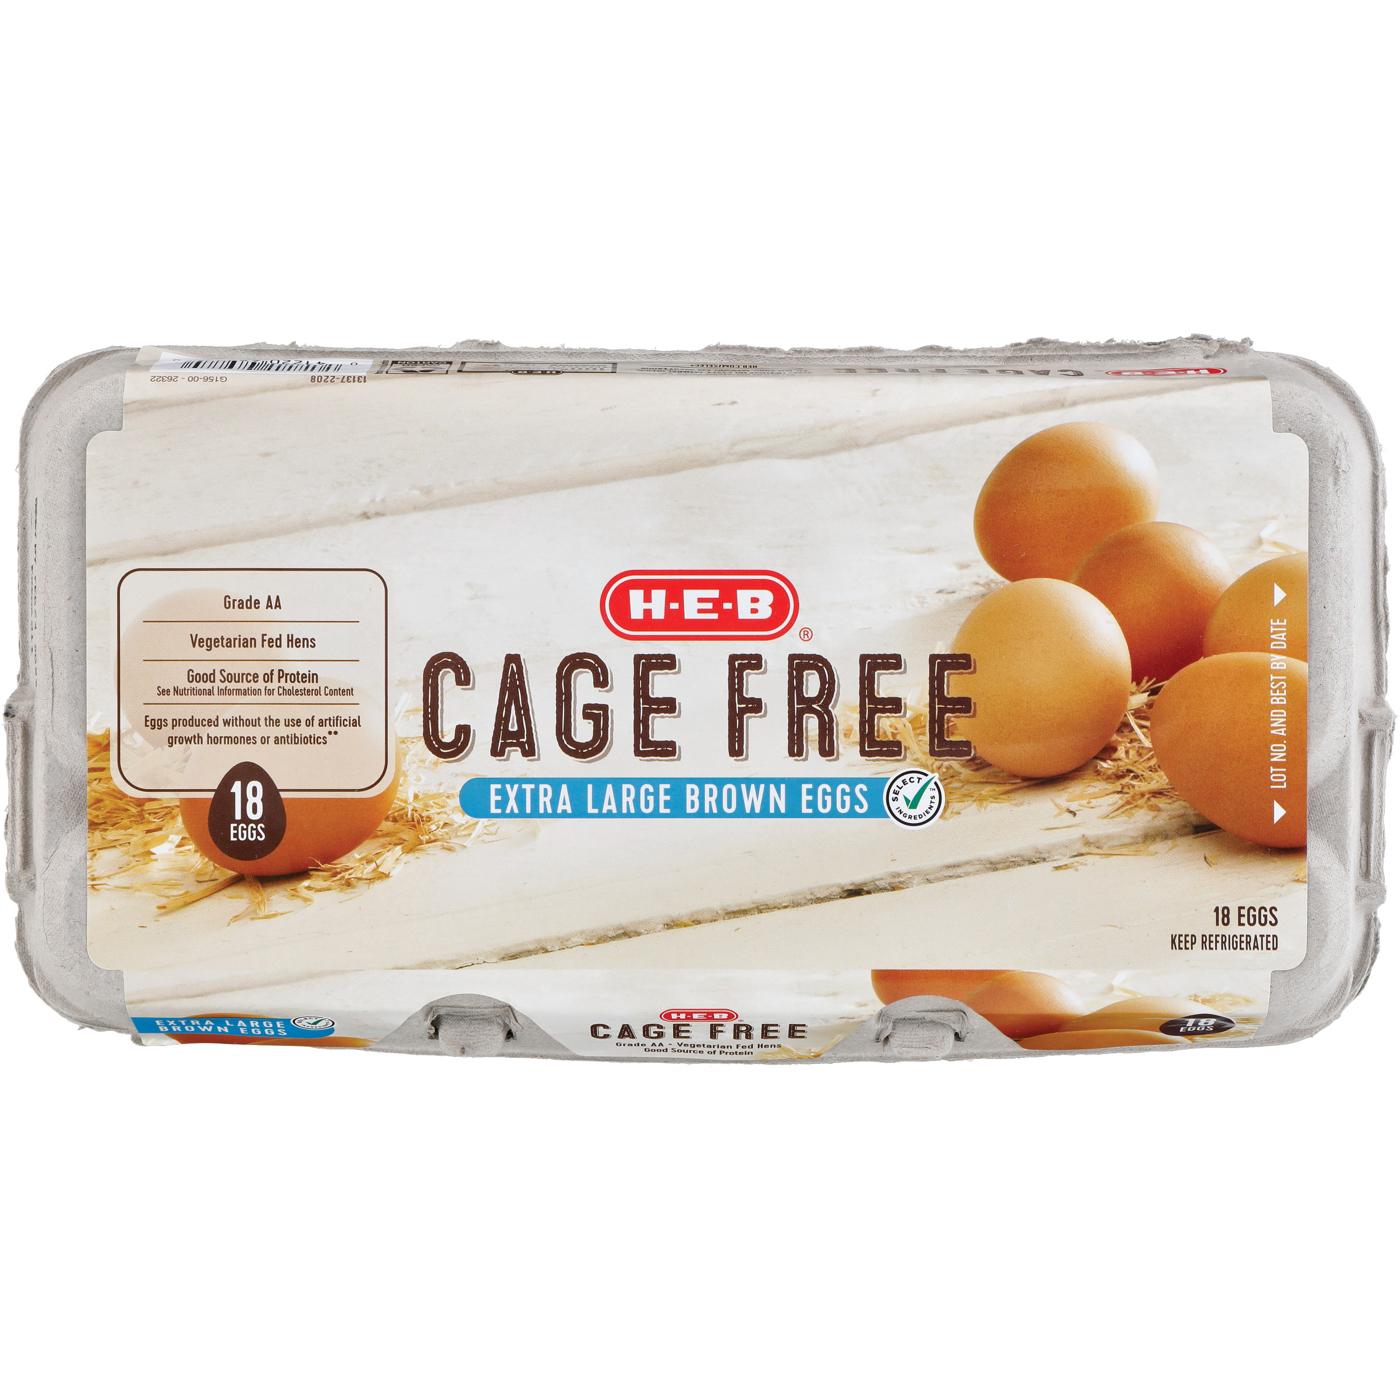 H-E-B Grade AA Cage Free Extra Large Brown Eggs; image 3 of 4